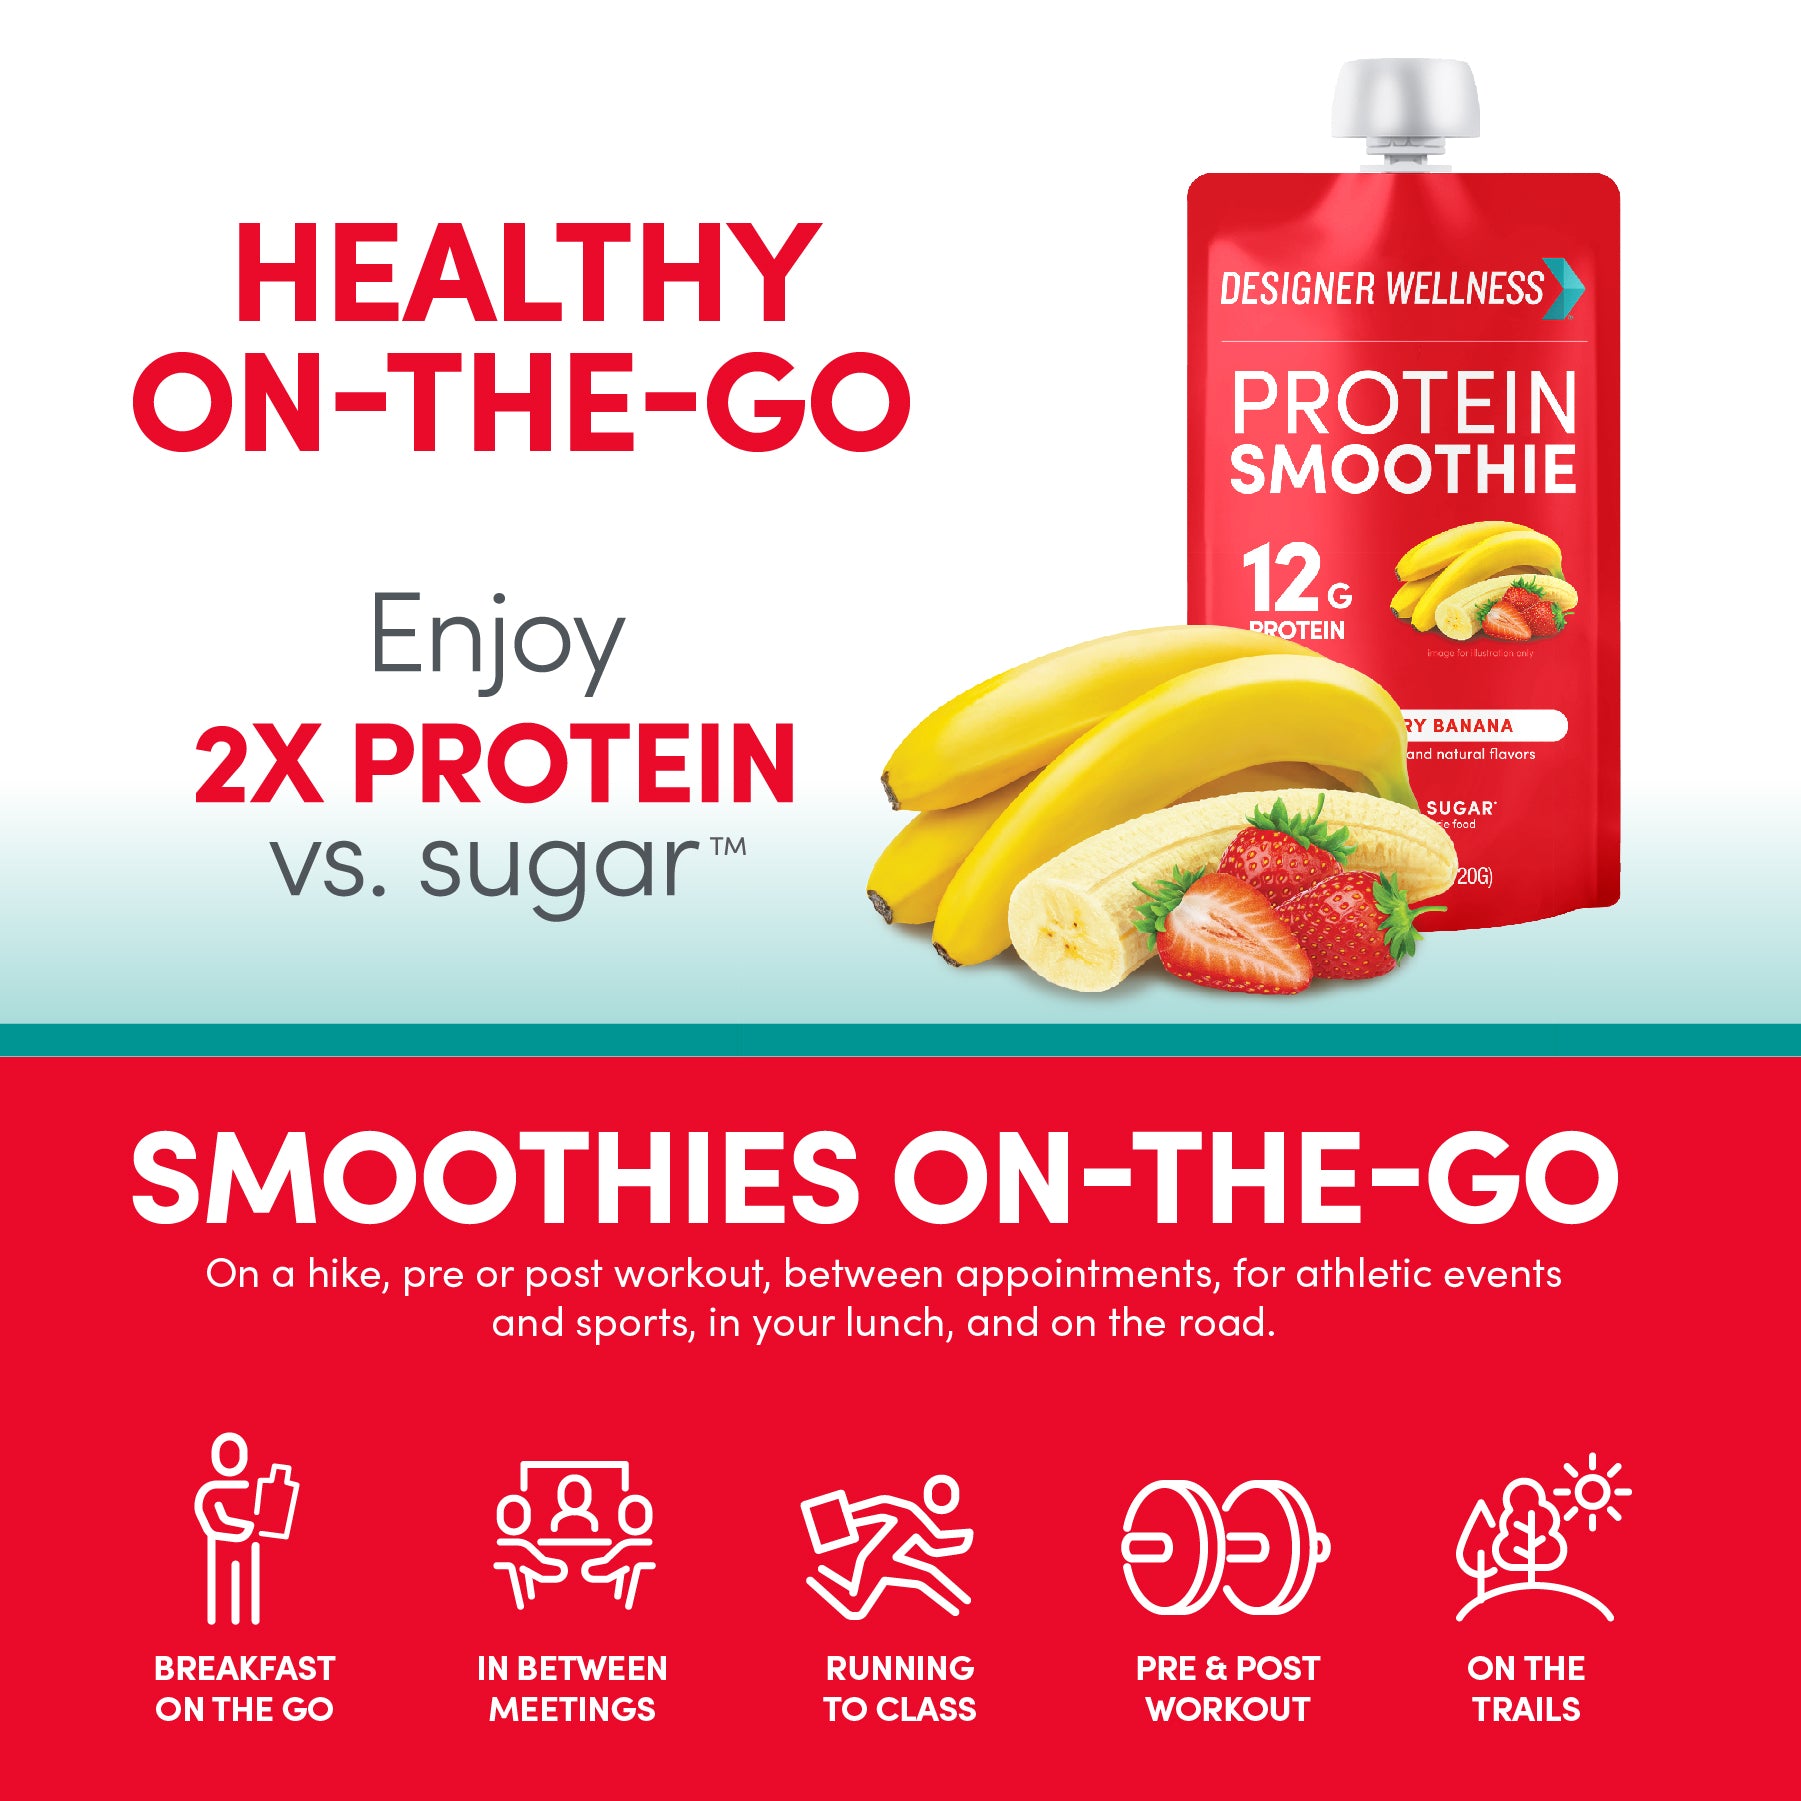 Protein Smoothie - Strawberry Banana 12 pack (6879940214964)